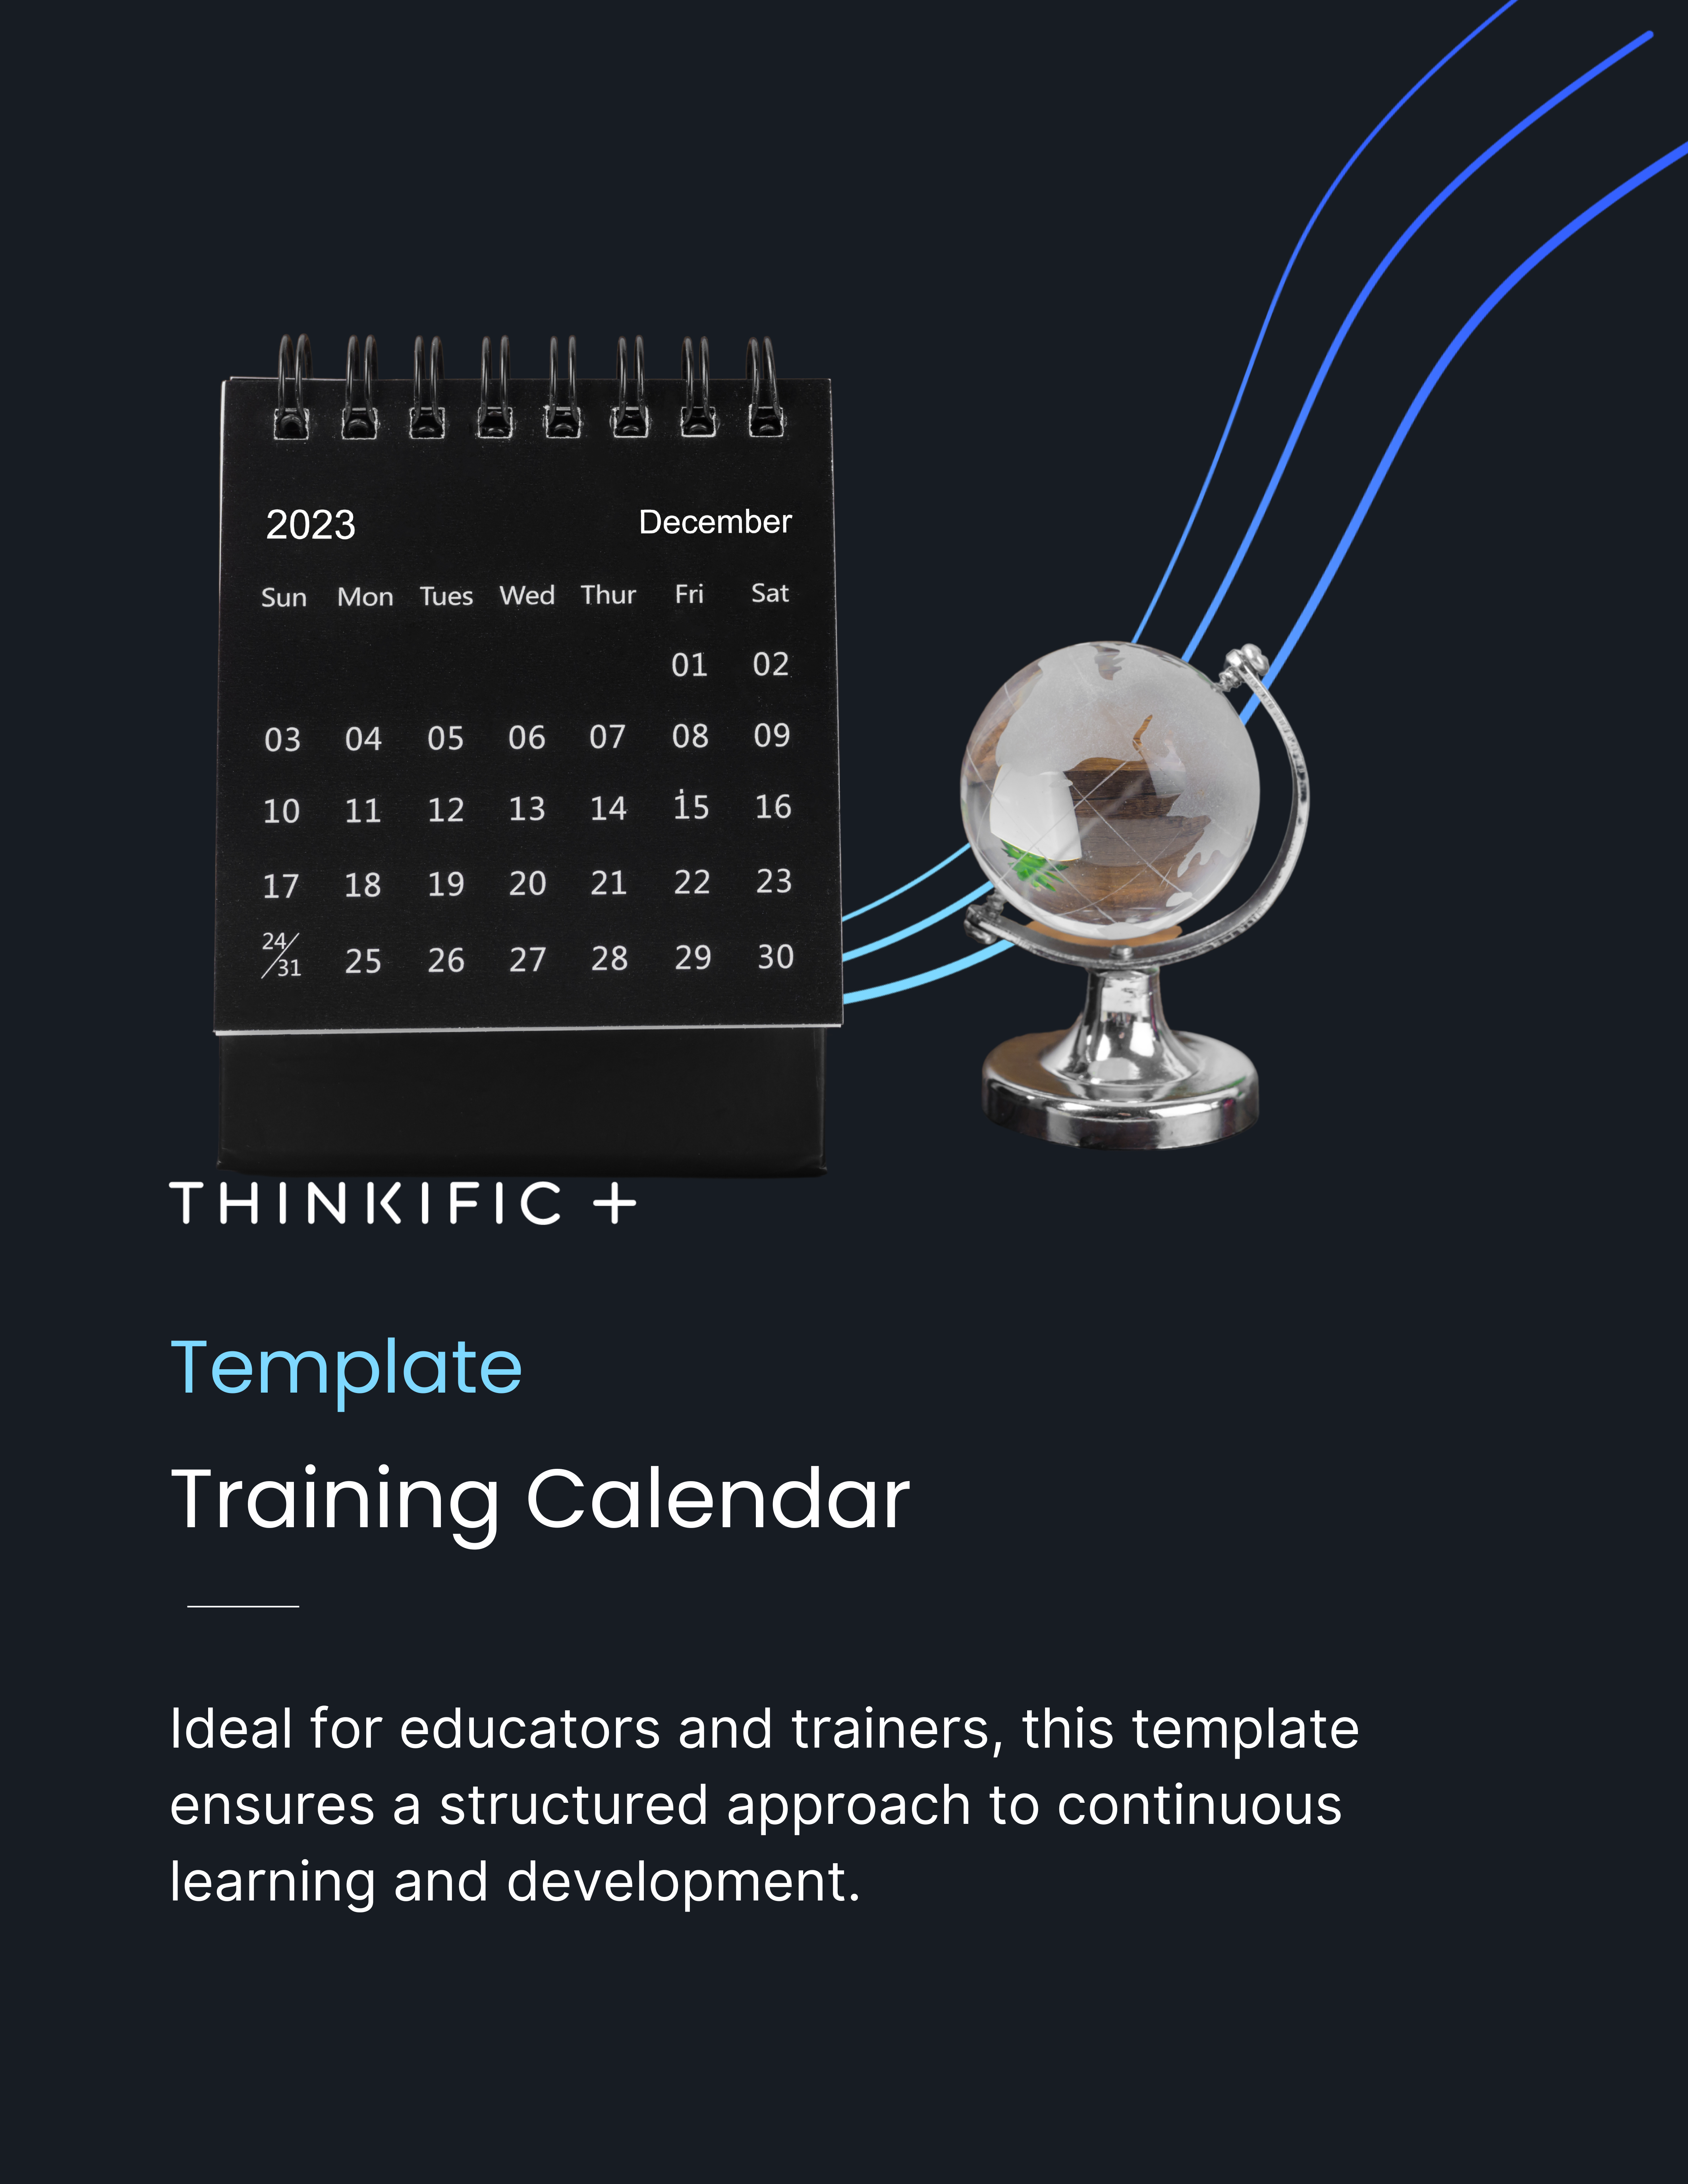 Free Training Calendar Template: Download Now